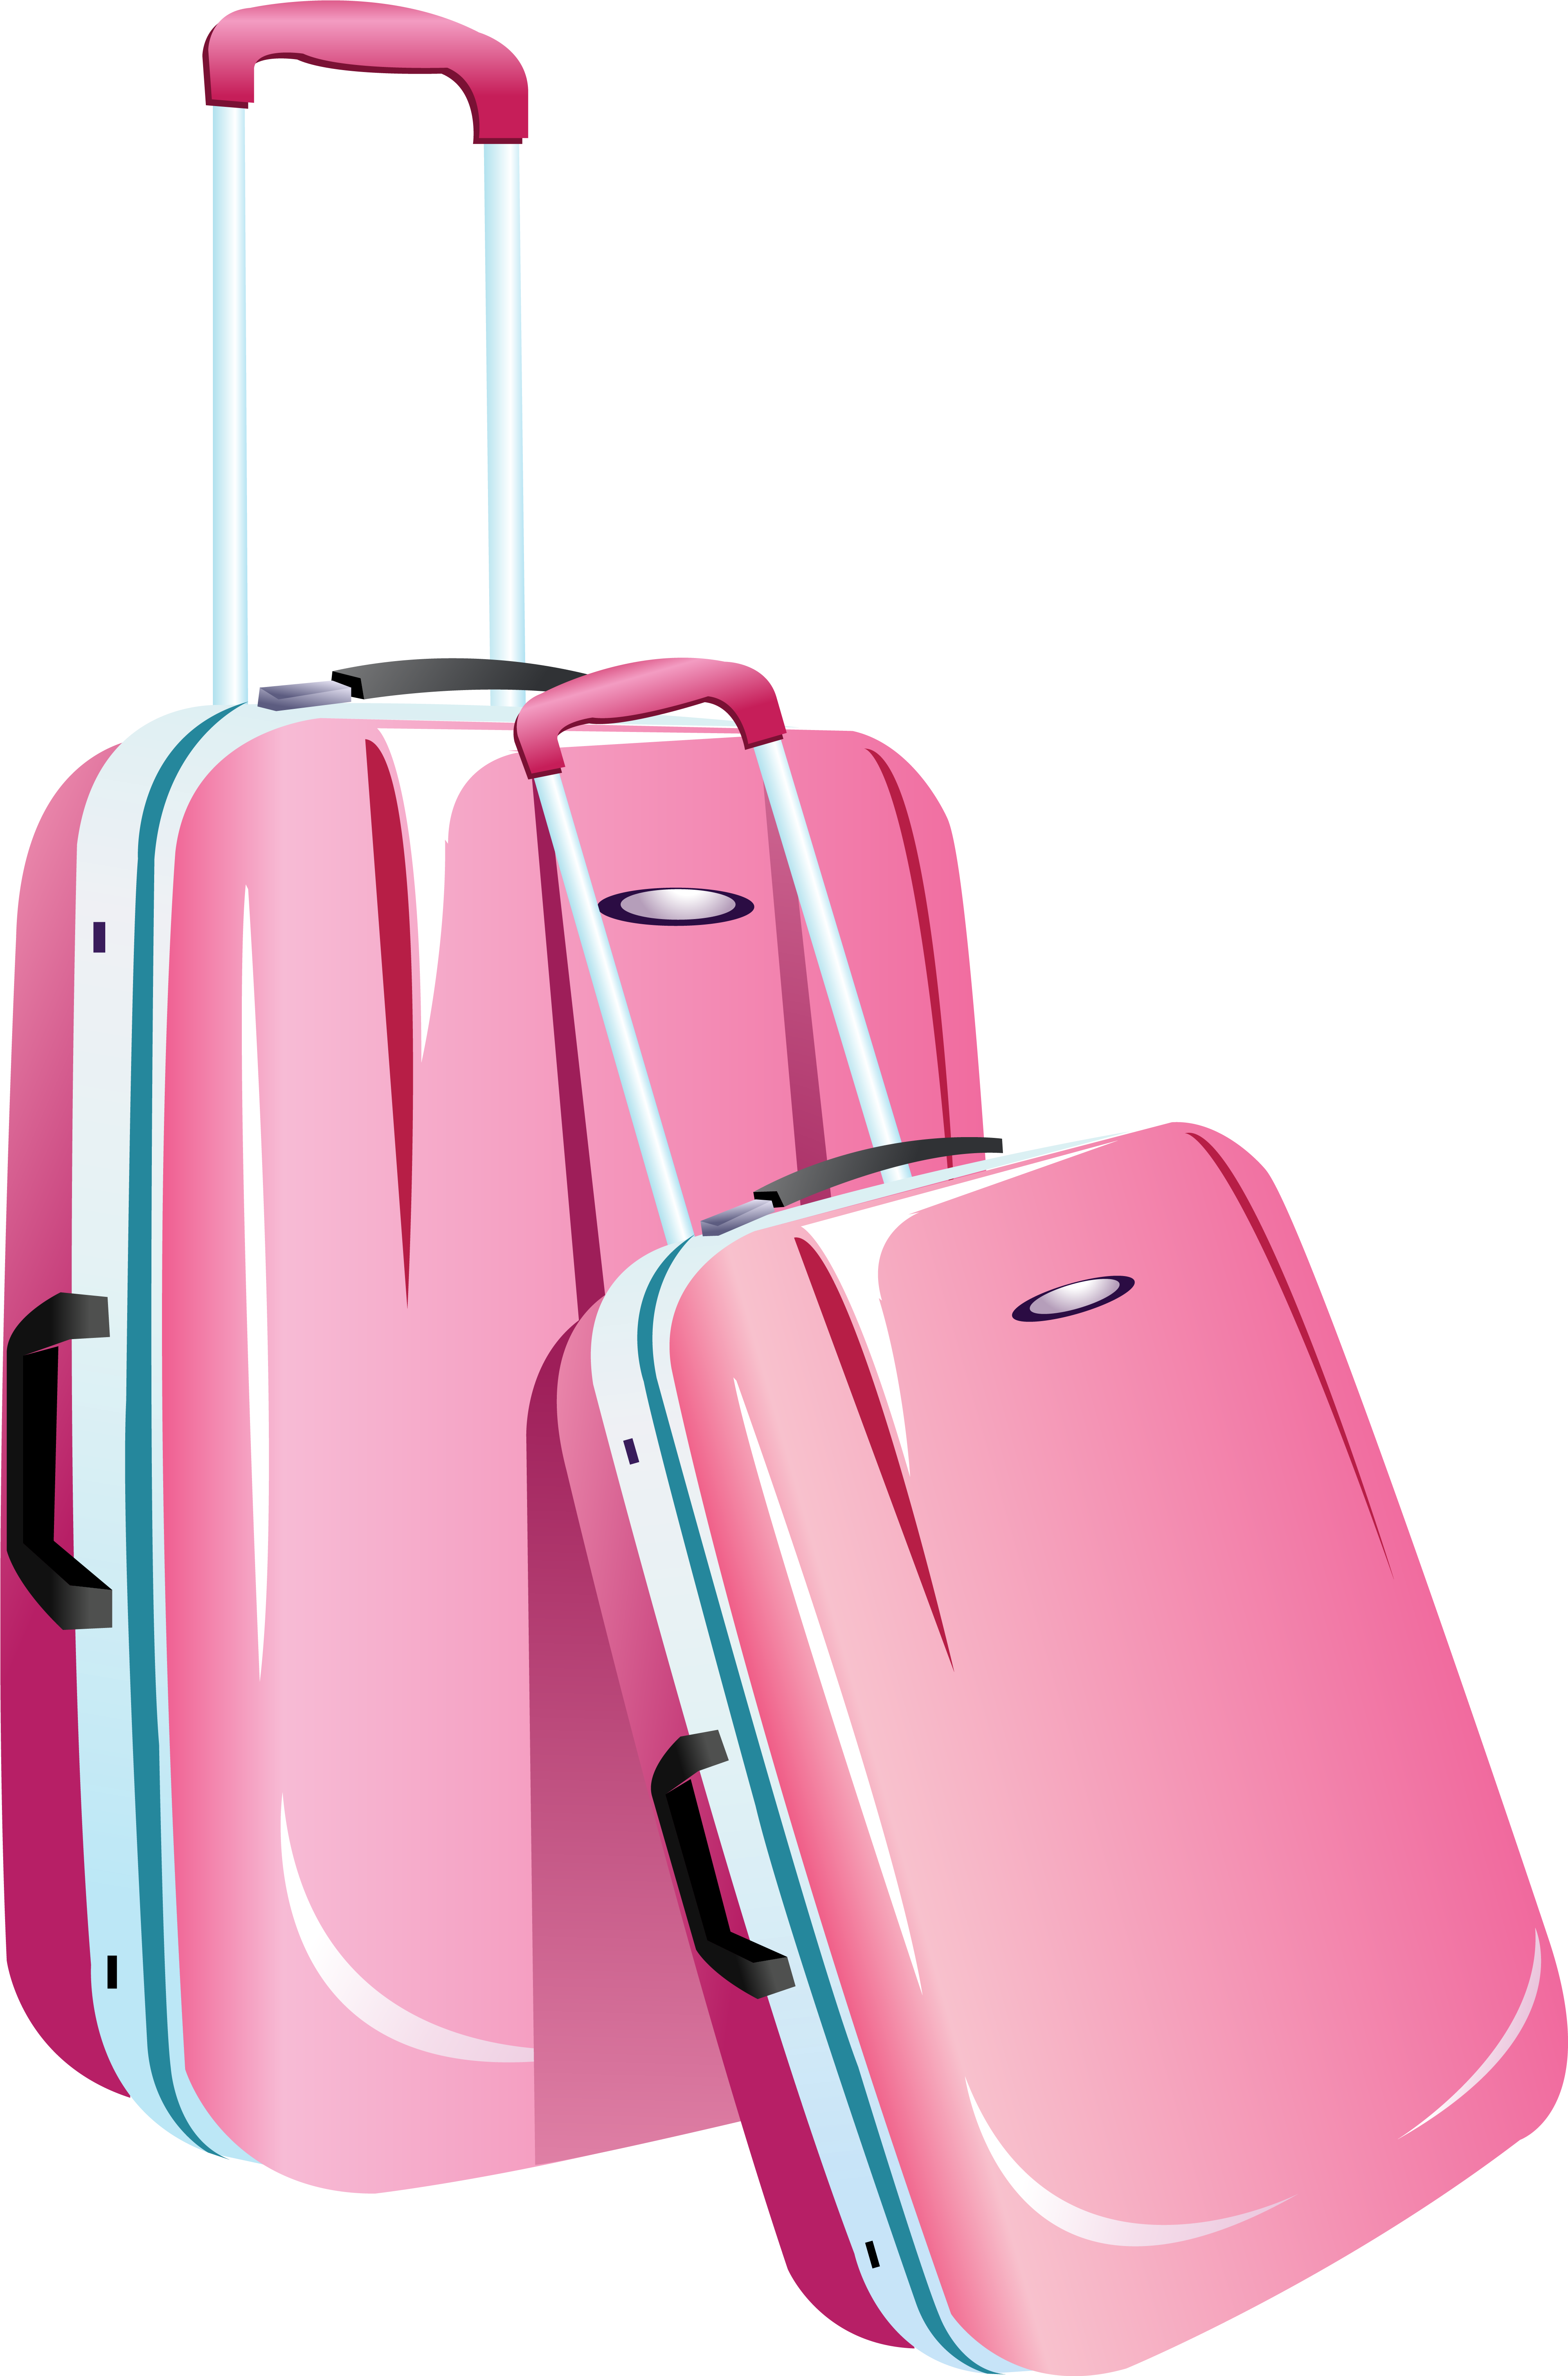 Pink Travel Bags Png Clipart Image - Travel Bagsclipart (4164x6309)